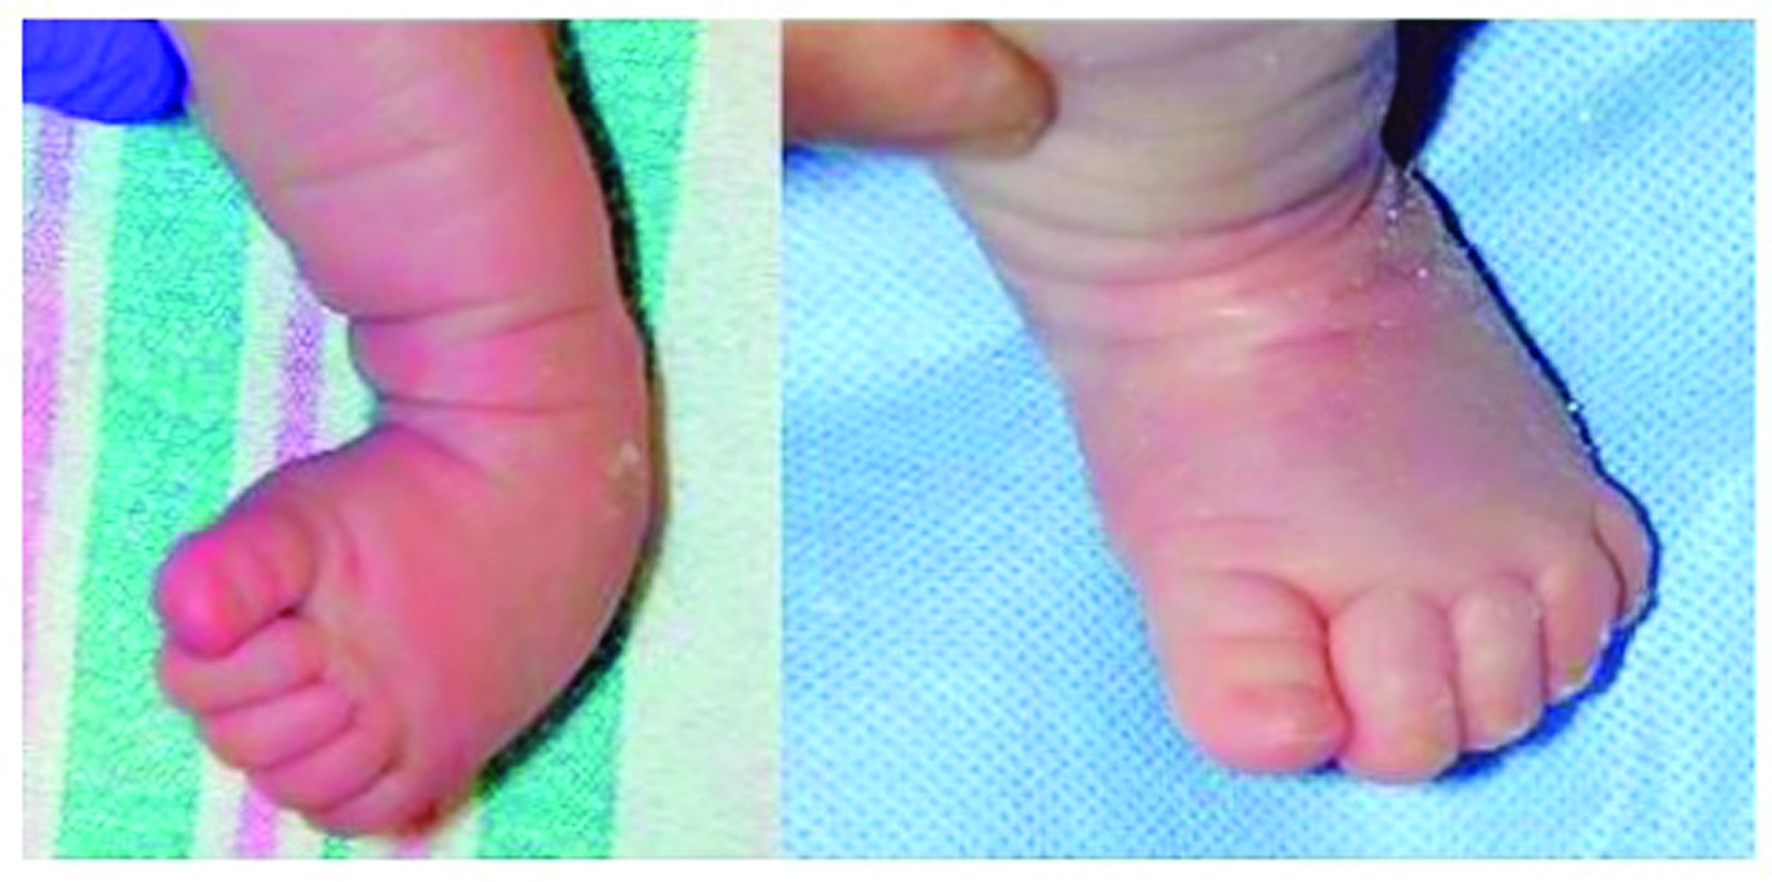 clubfoot-before-and-after-1645550777.jpg